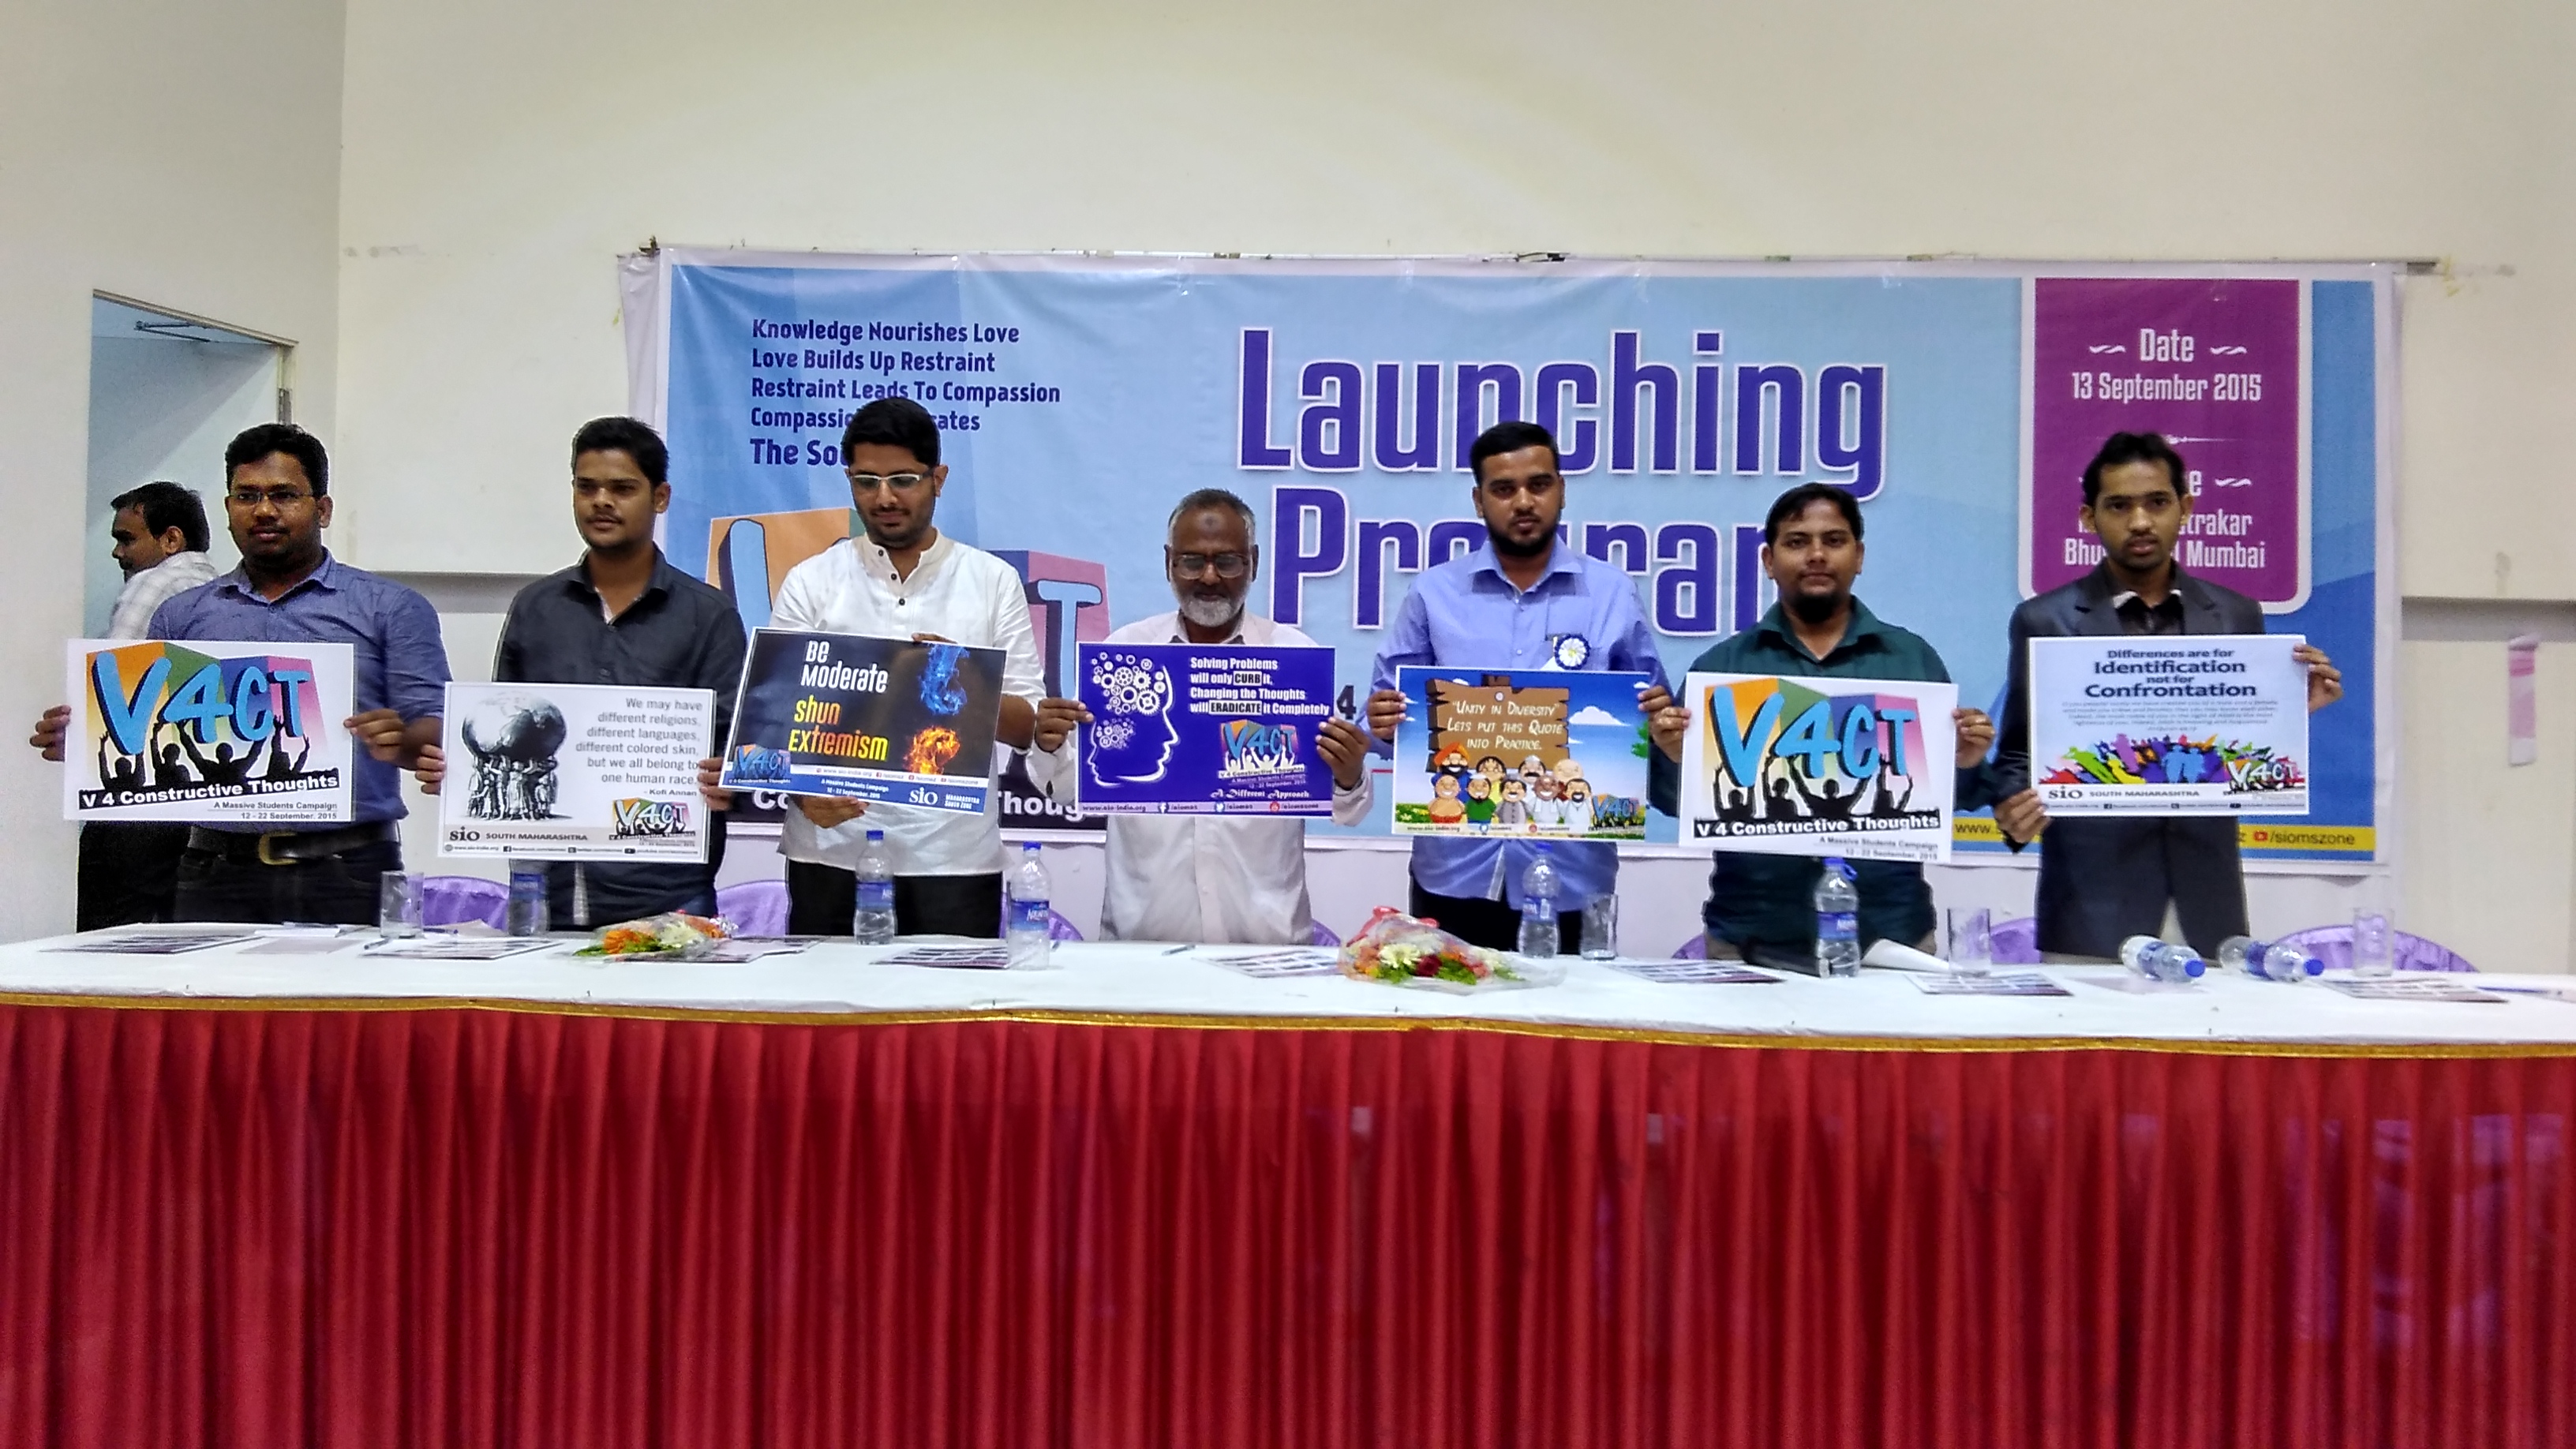 Launching Event held in mumbai for State wide Campaign “V 4 Constructive Thoughts” by SIO South Maharashtra